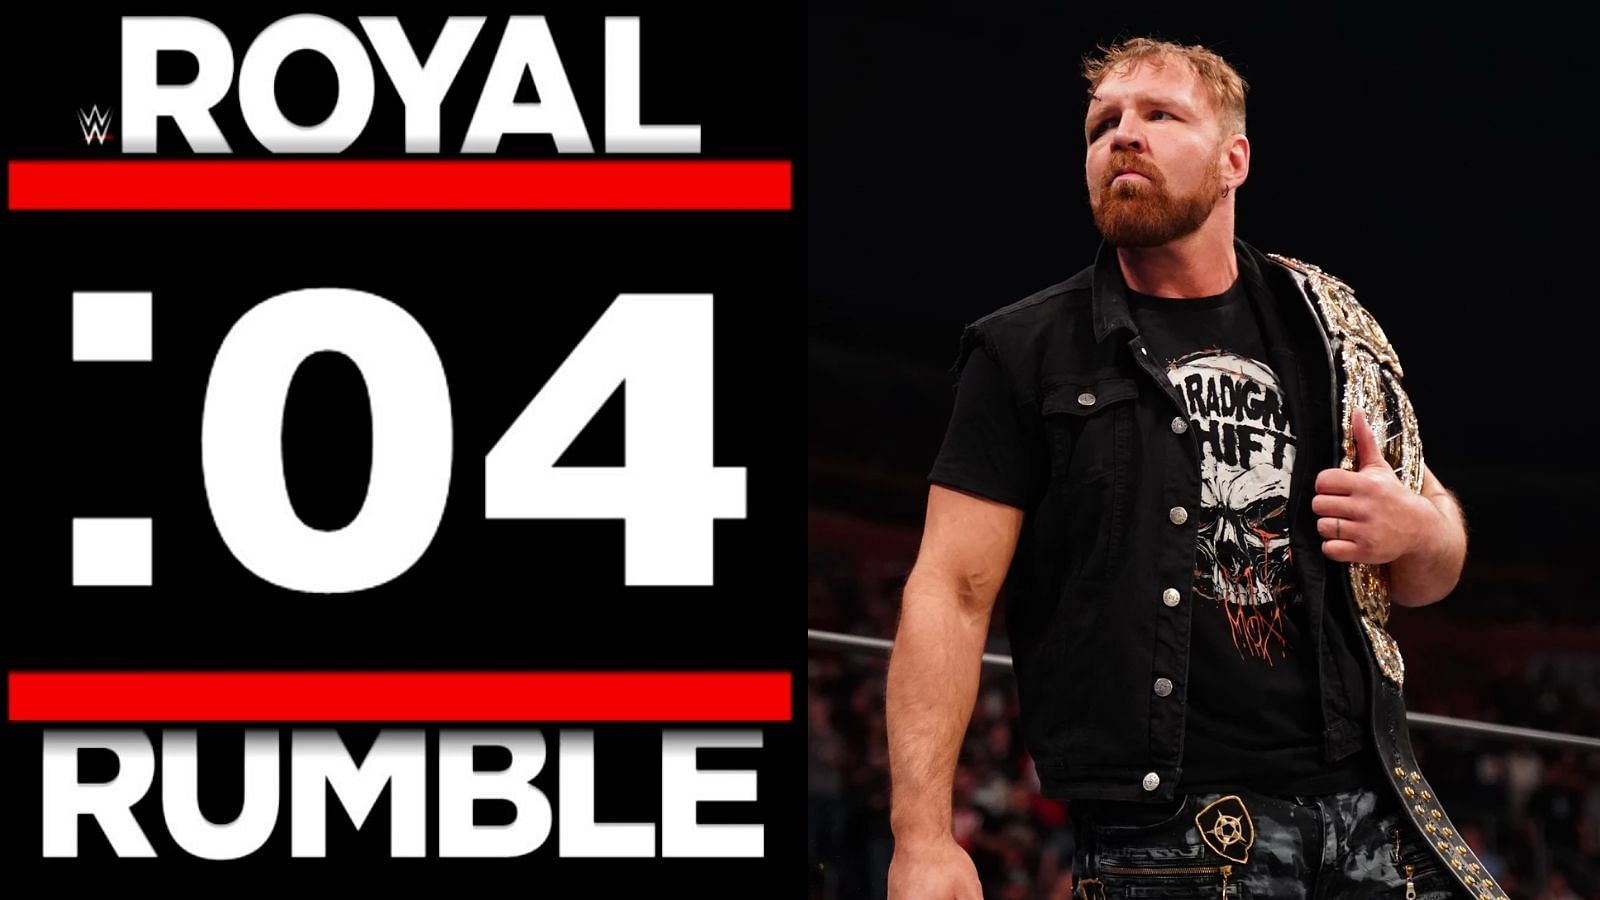 Could the &quot;Lunatic Fringe&quot; make an appearance at the Royal Rumble?